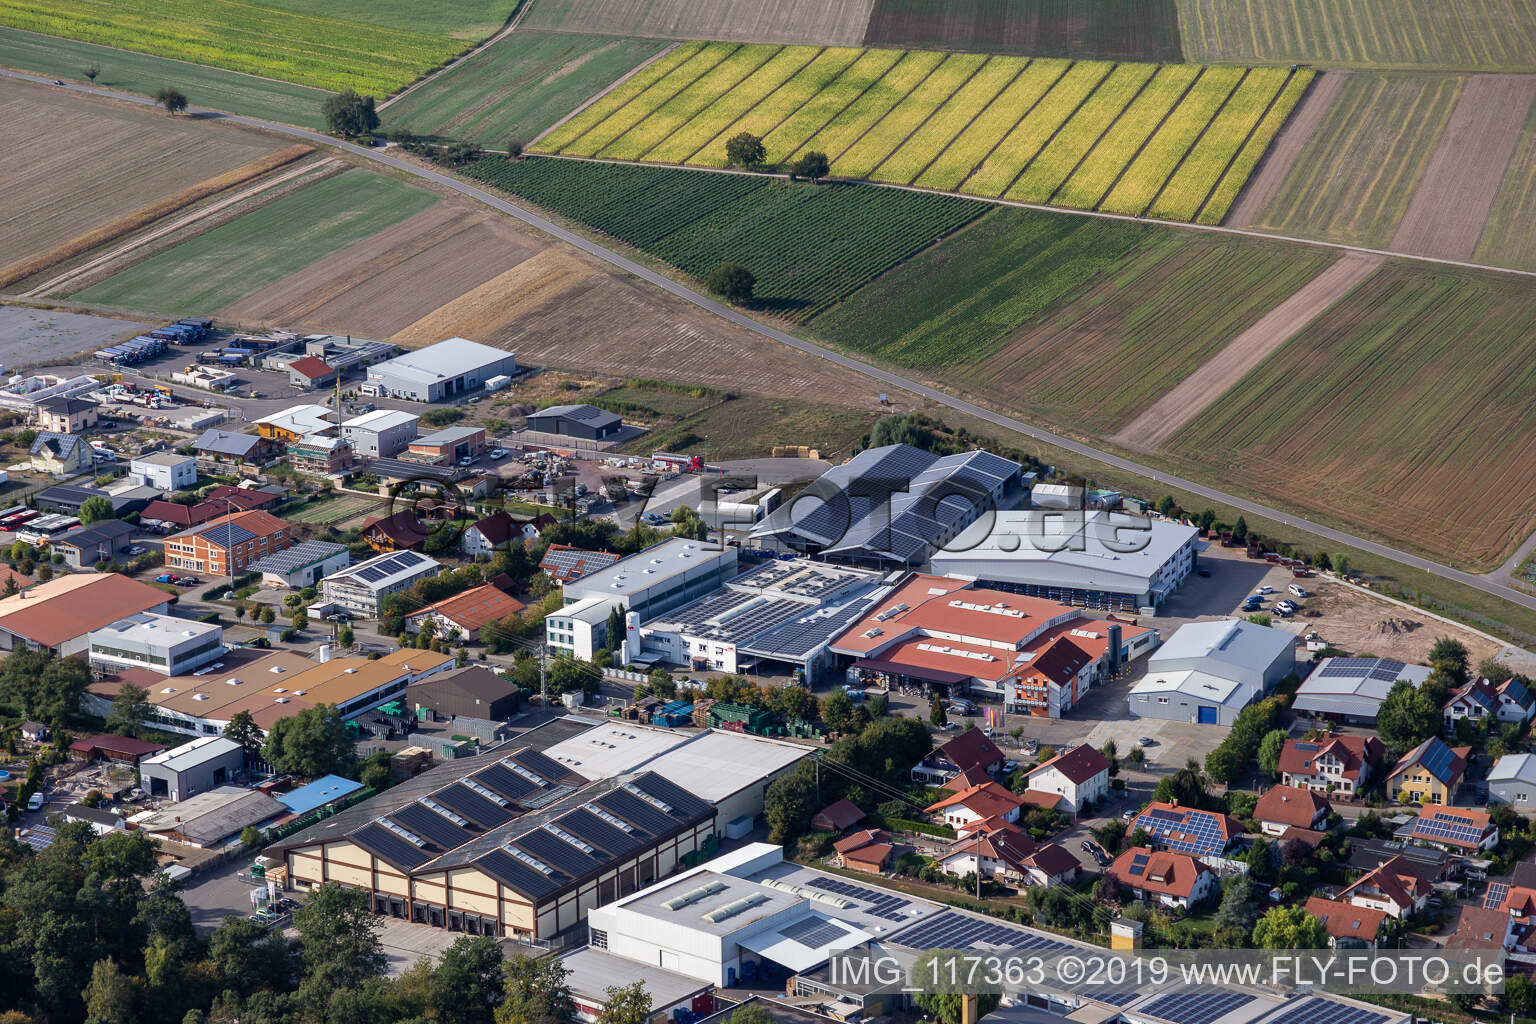 Commercial area Im Gereut, HGGS LaserCUT GmbH & Co. KG in Hatzenbühl in the state Rhineland-Palatinate, Germany seen from above